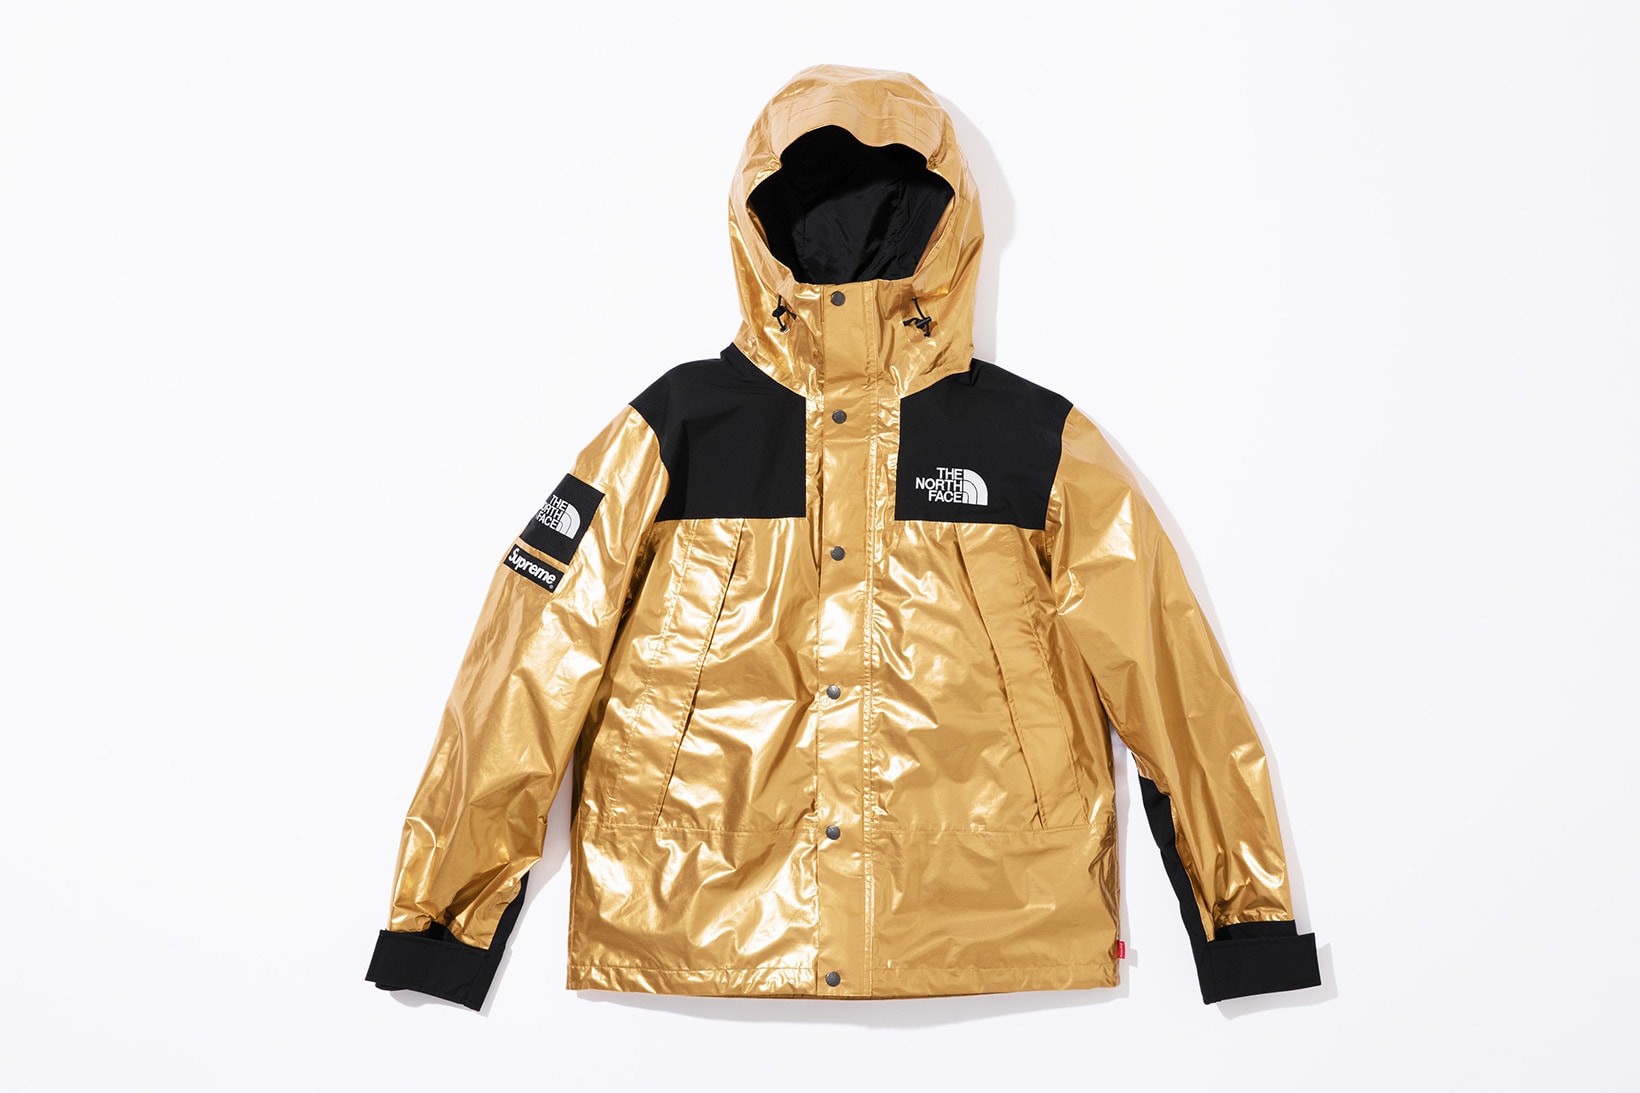 Supreme x The North Face Metallic Spring 2018 Collection Gold Silver Rose Gold Mountain Parka Roo II Bag Backpack Sling Bag Overalls Bib Pants T-Shirt Hooded Sweatshirt